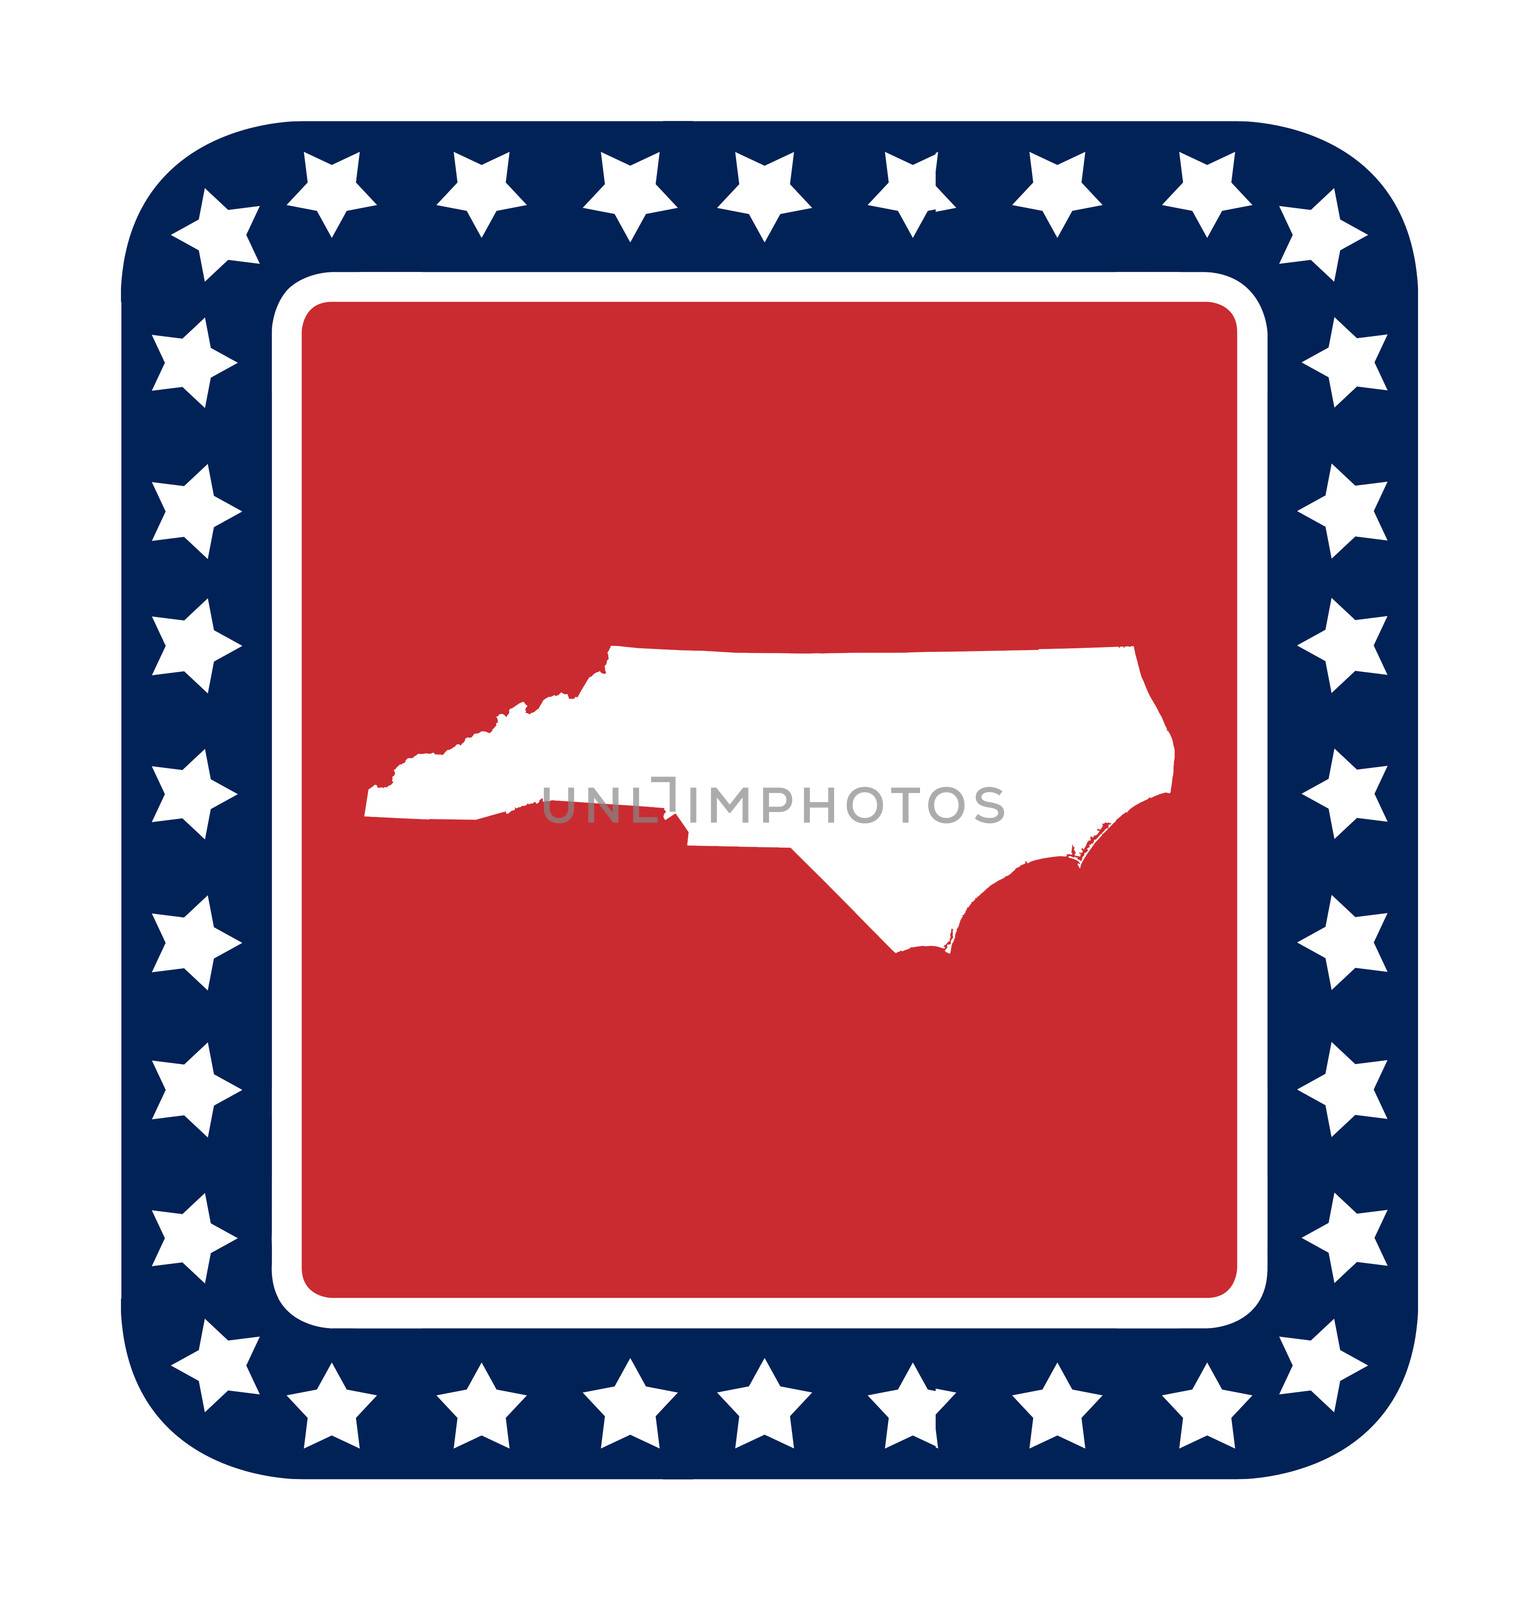 North Carolina state button on American flag in flat web design style, isolated on white background.